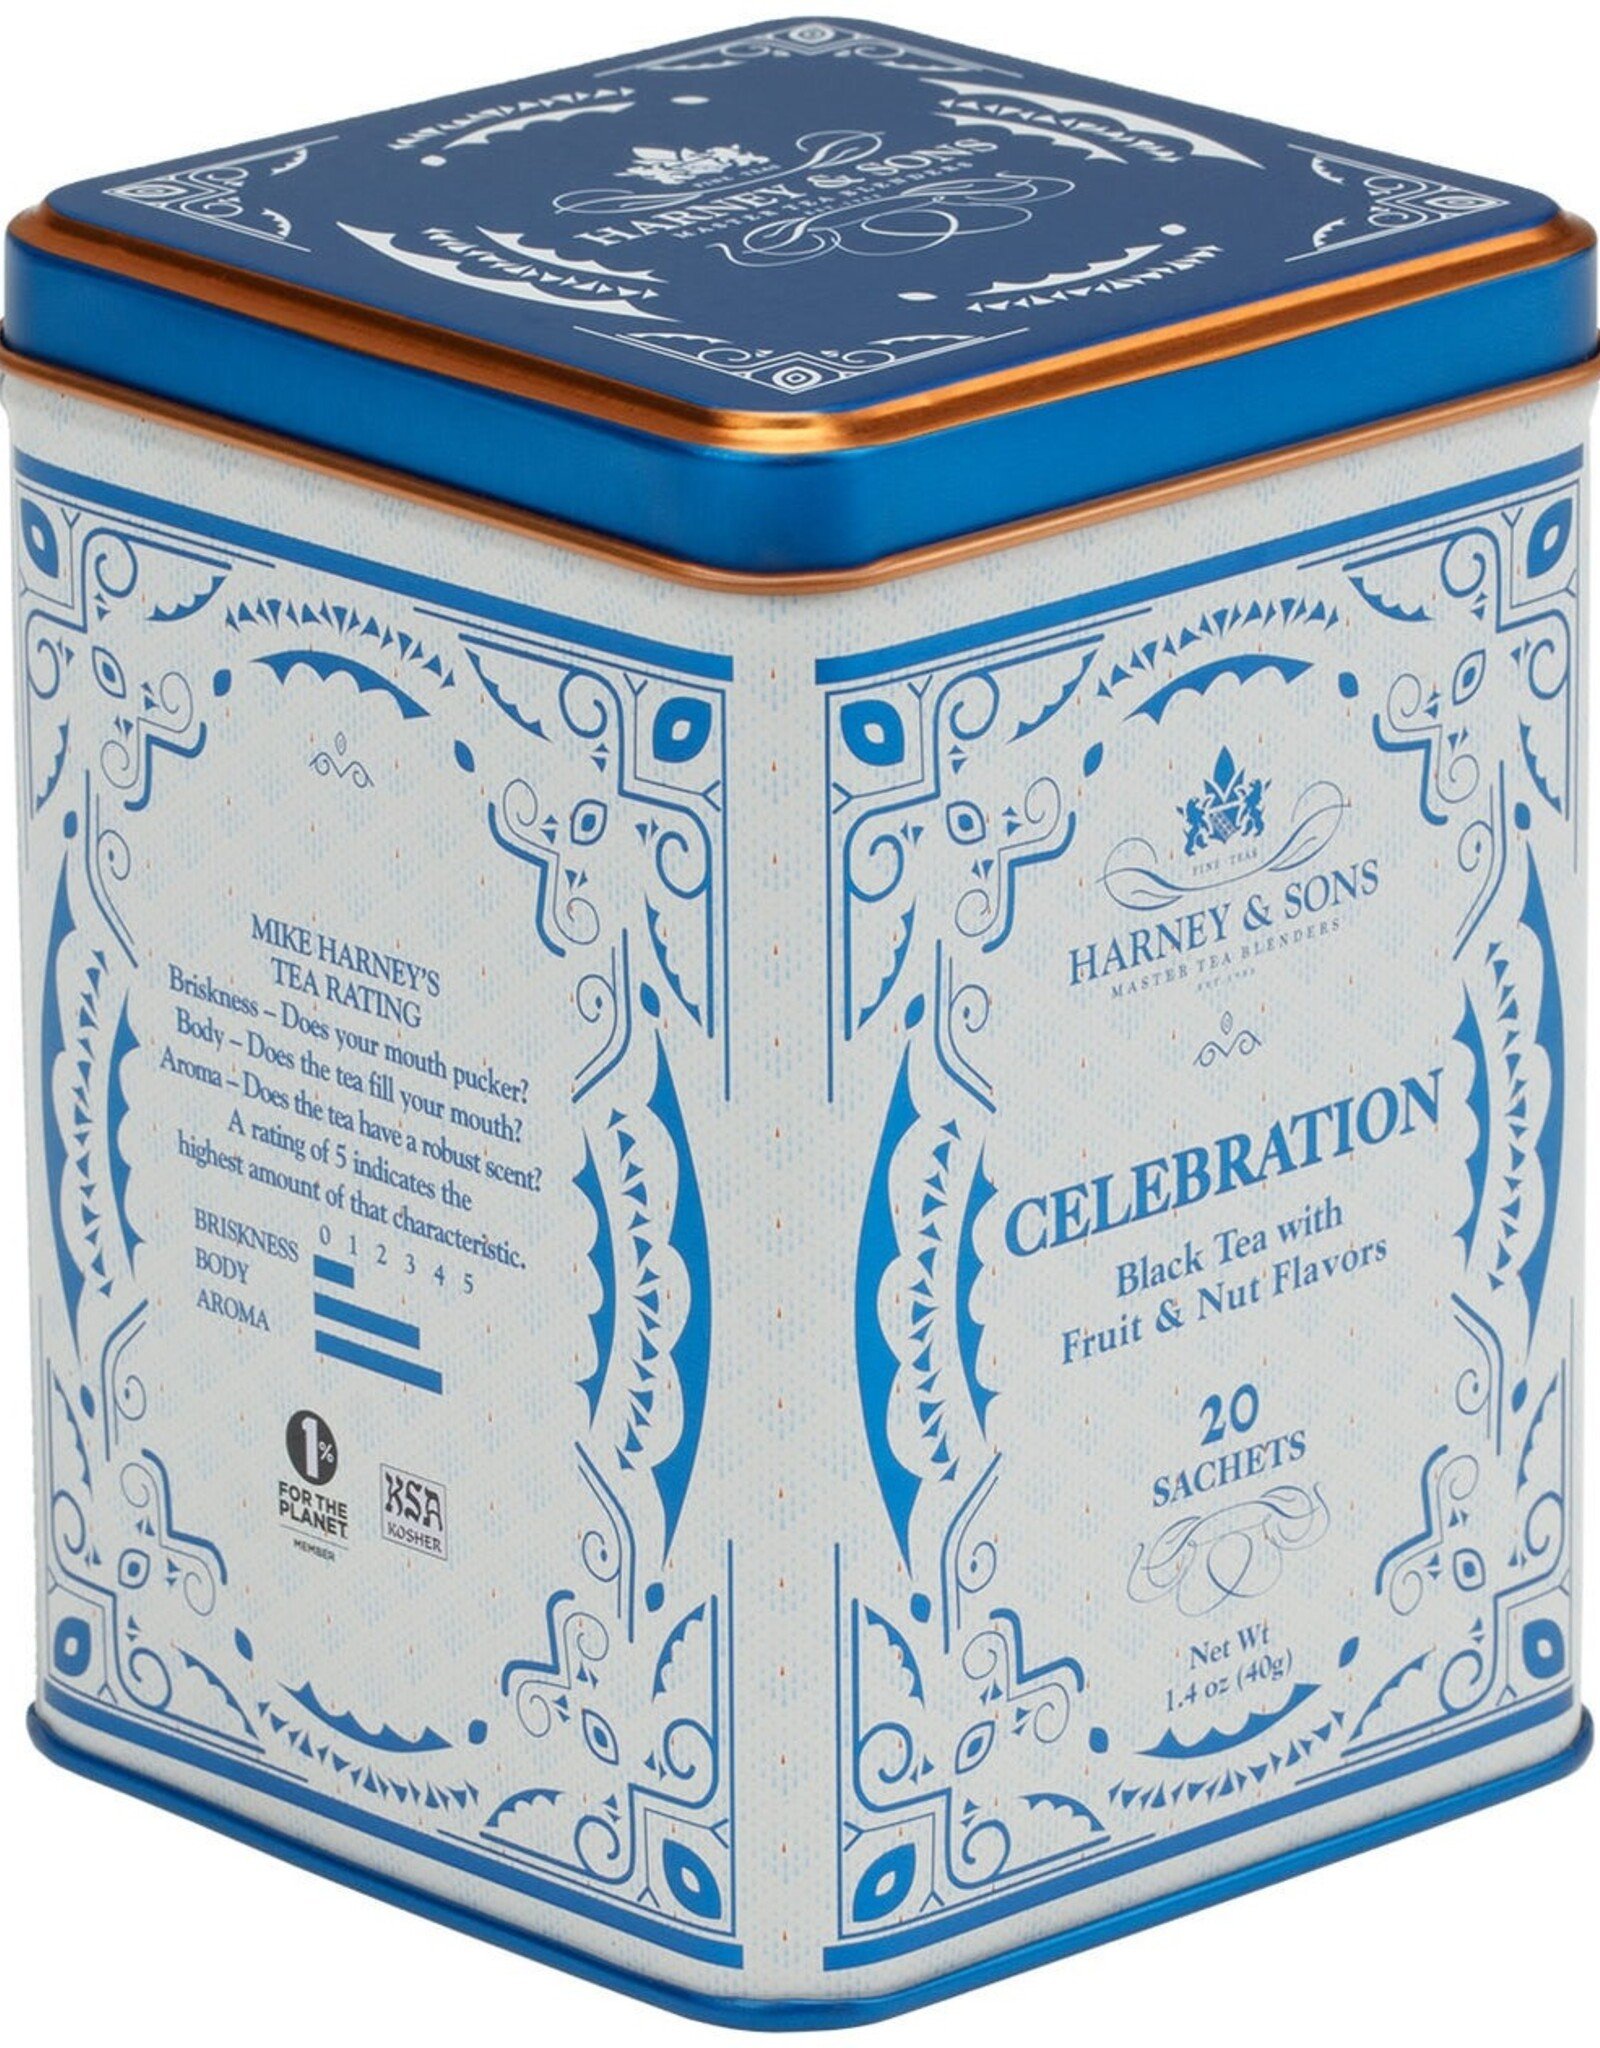 Harney and Sons Tea Celebration Sachets, 20 Count